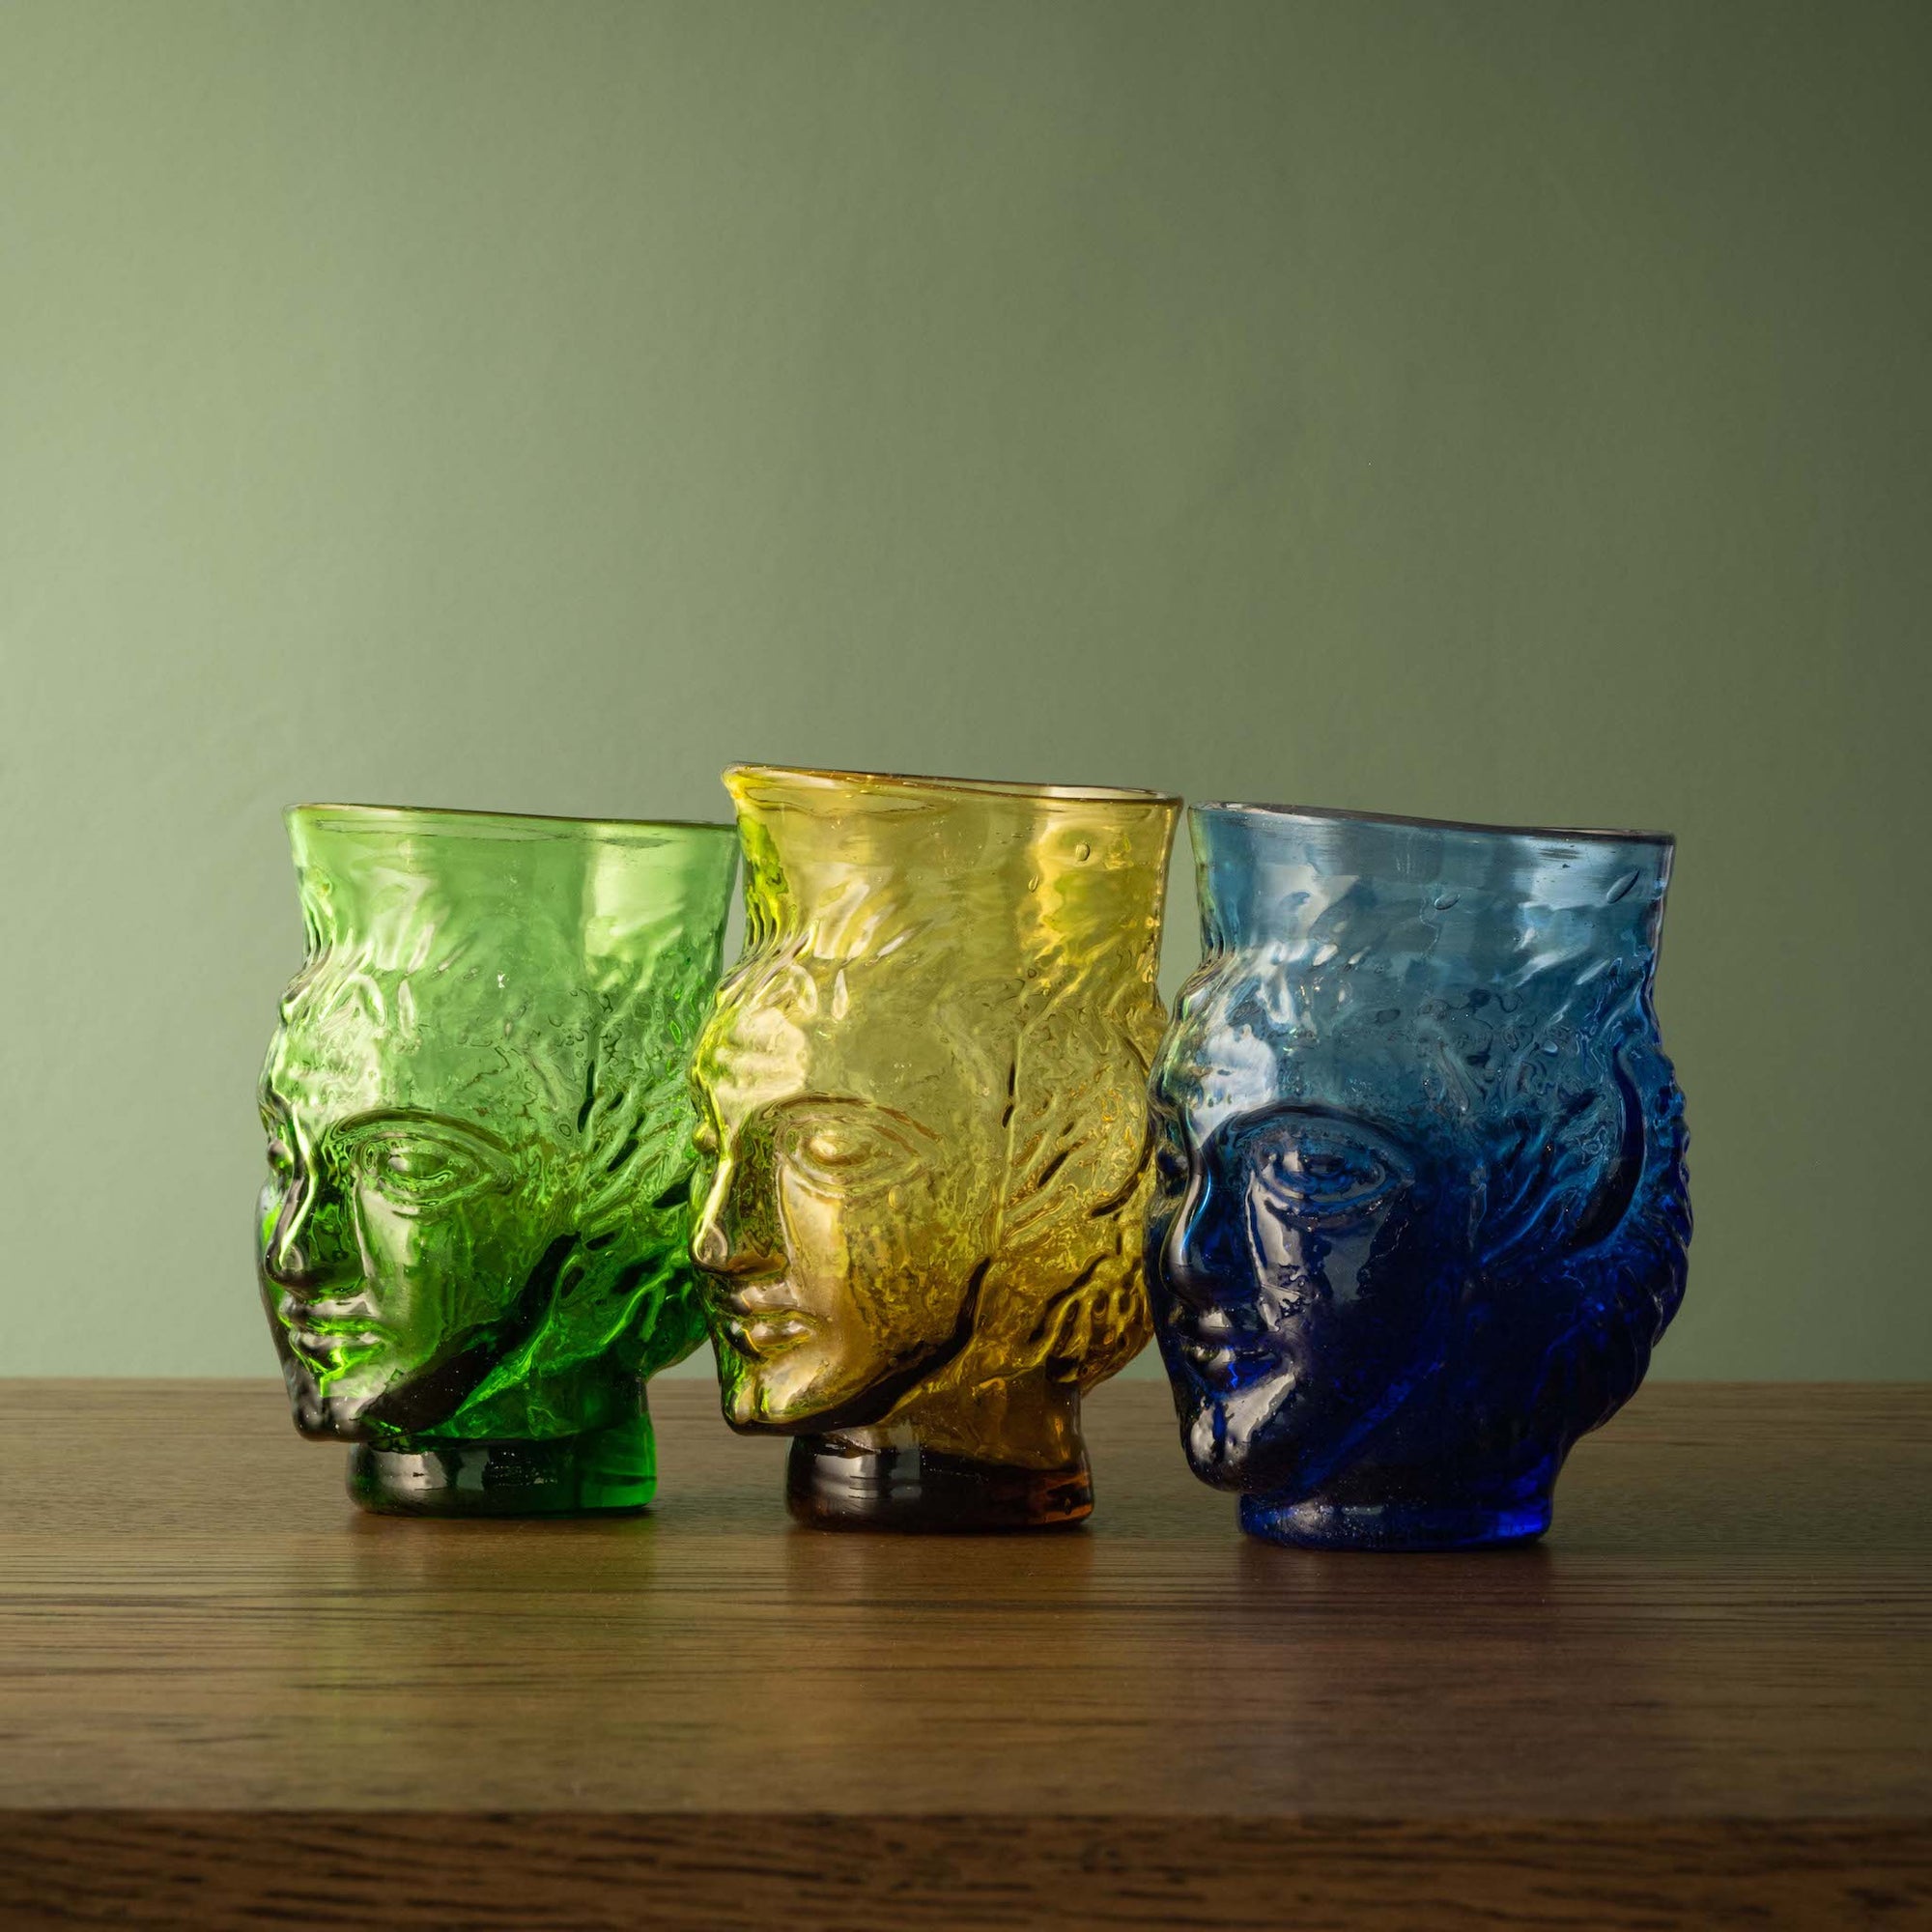 La Soufflerie Verre Tete in Green, Yellow and Dark Blue Recycled Glass